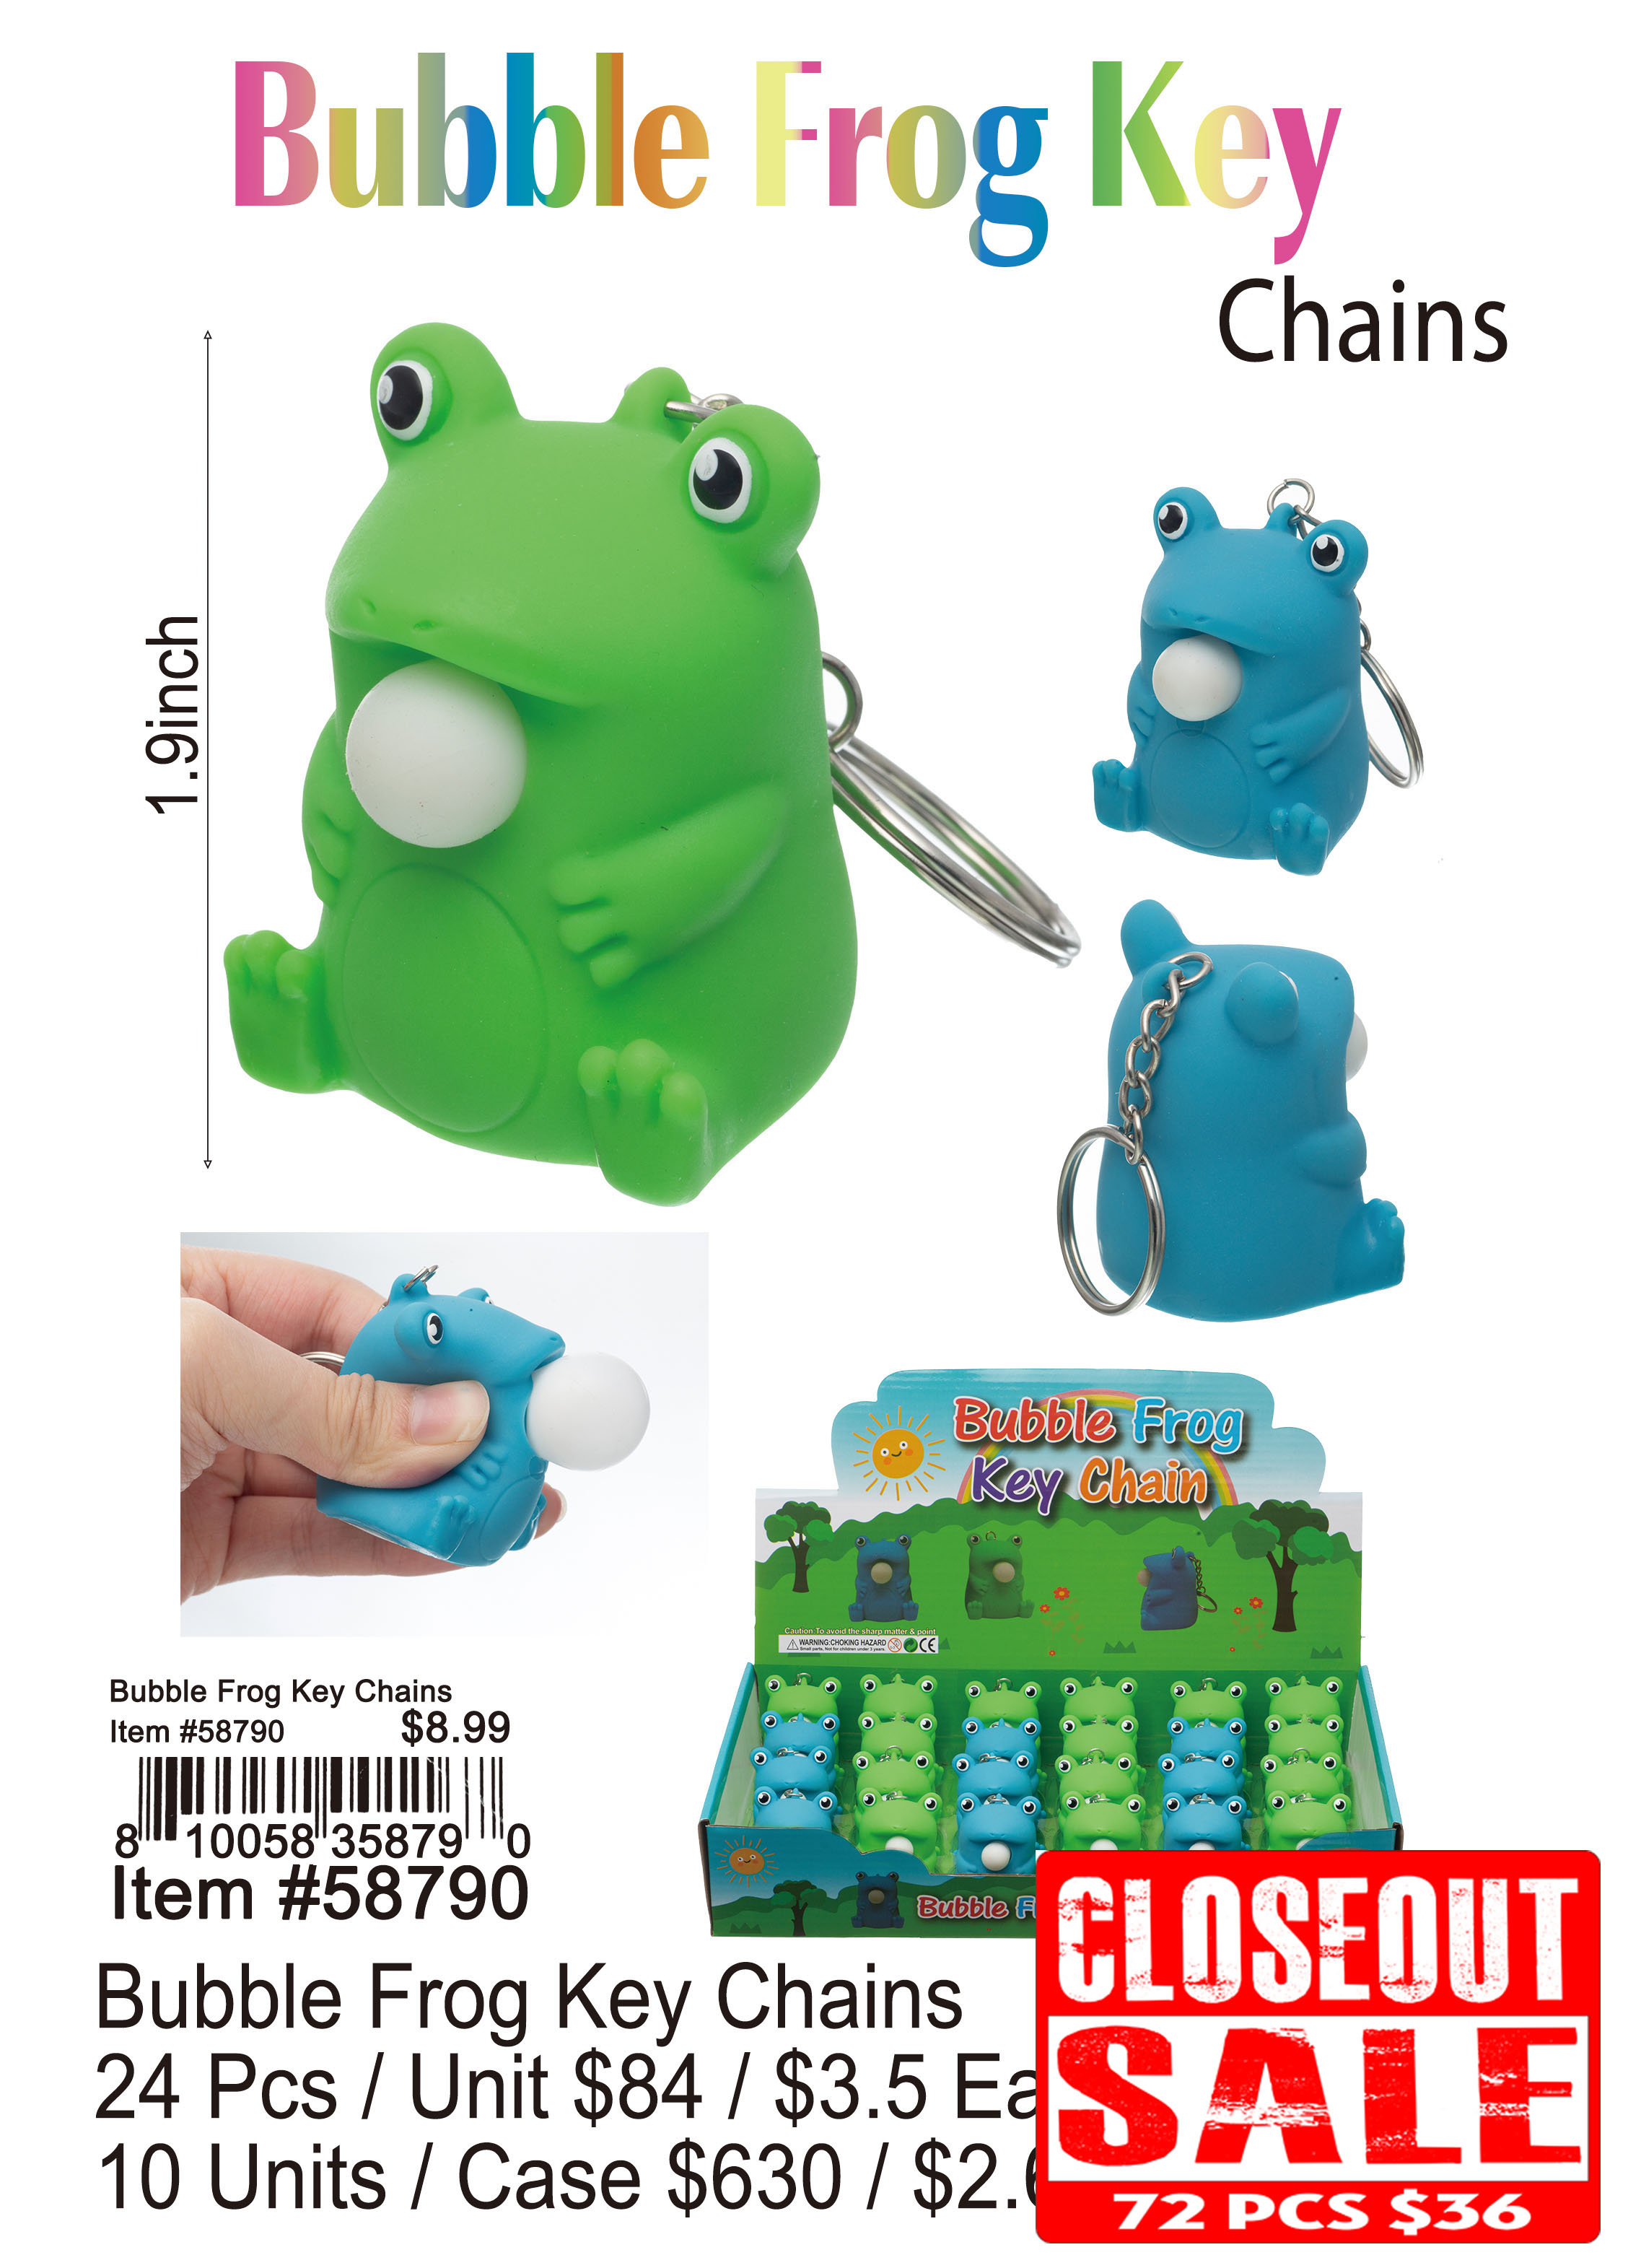 Bubble Frog Keychains (CL)